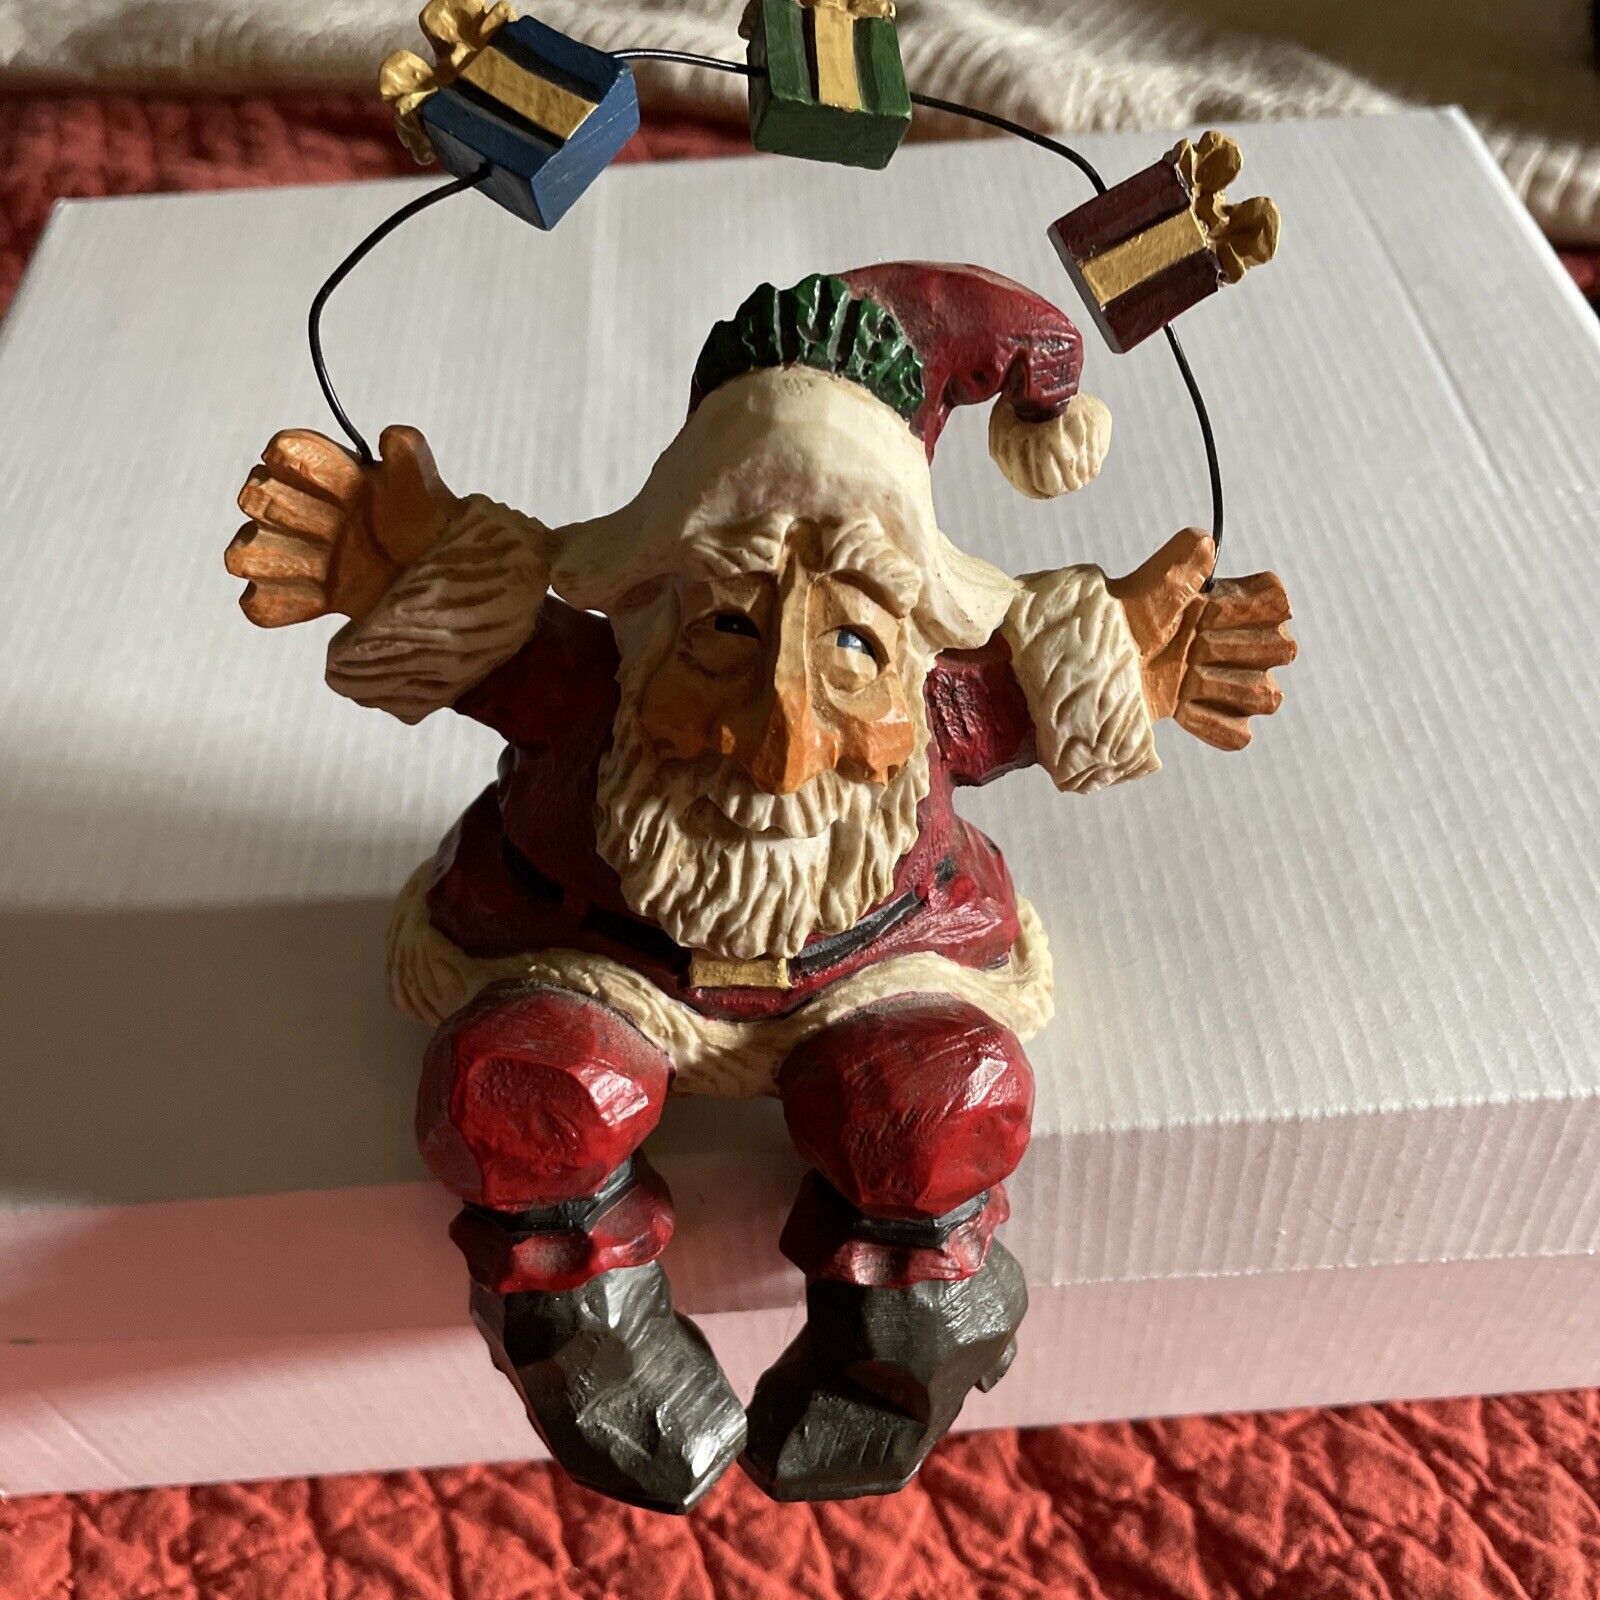 Rare David Frykman Clause Juggling Presents Hand Painted Shelf Sitter 7”x5” Ice